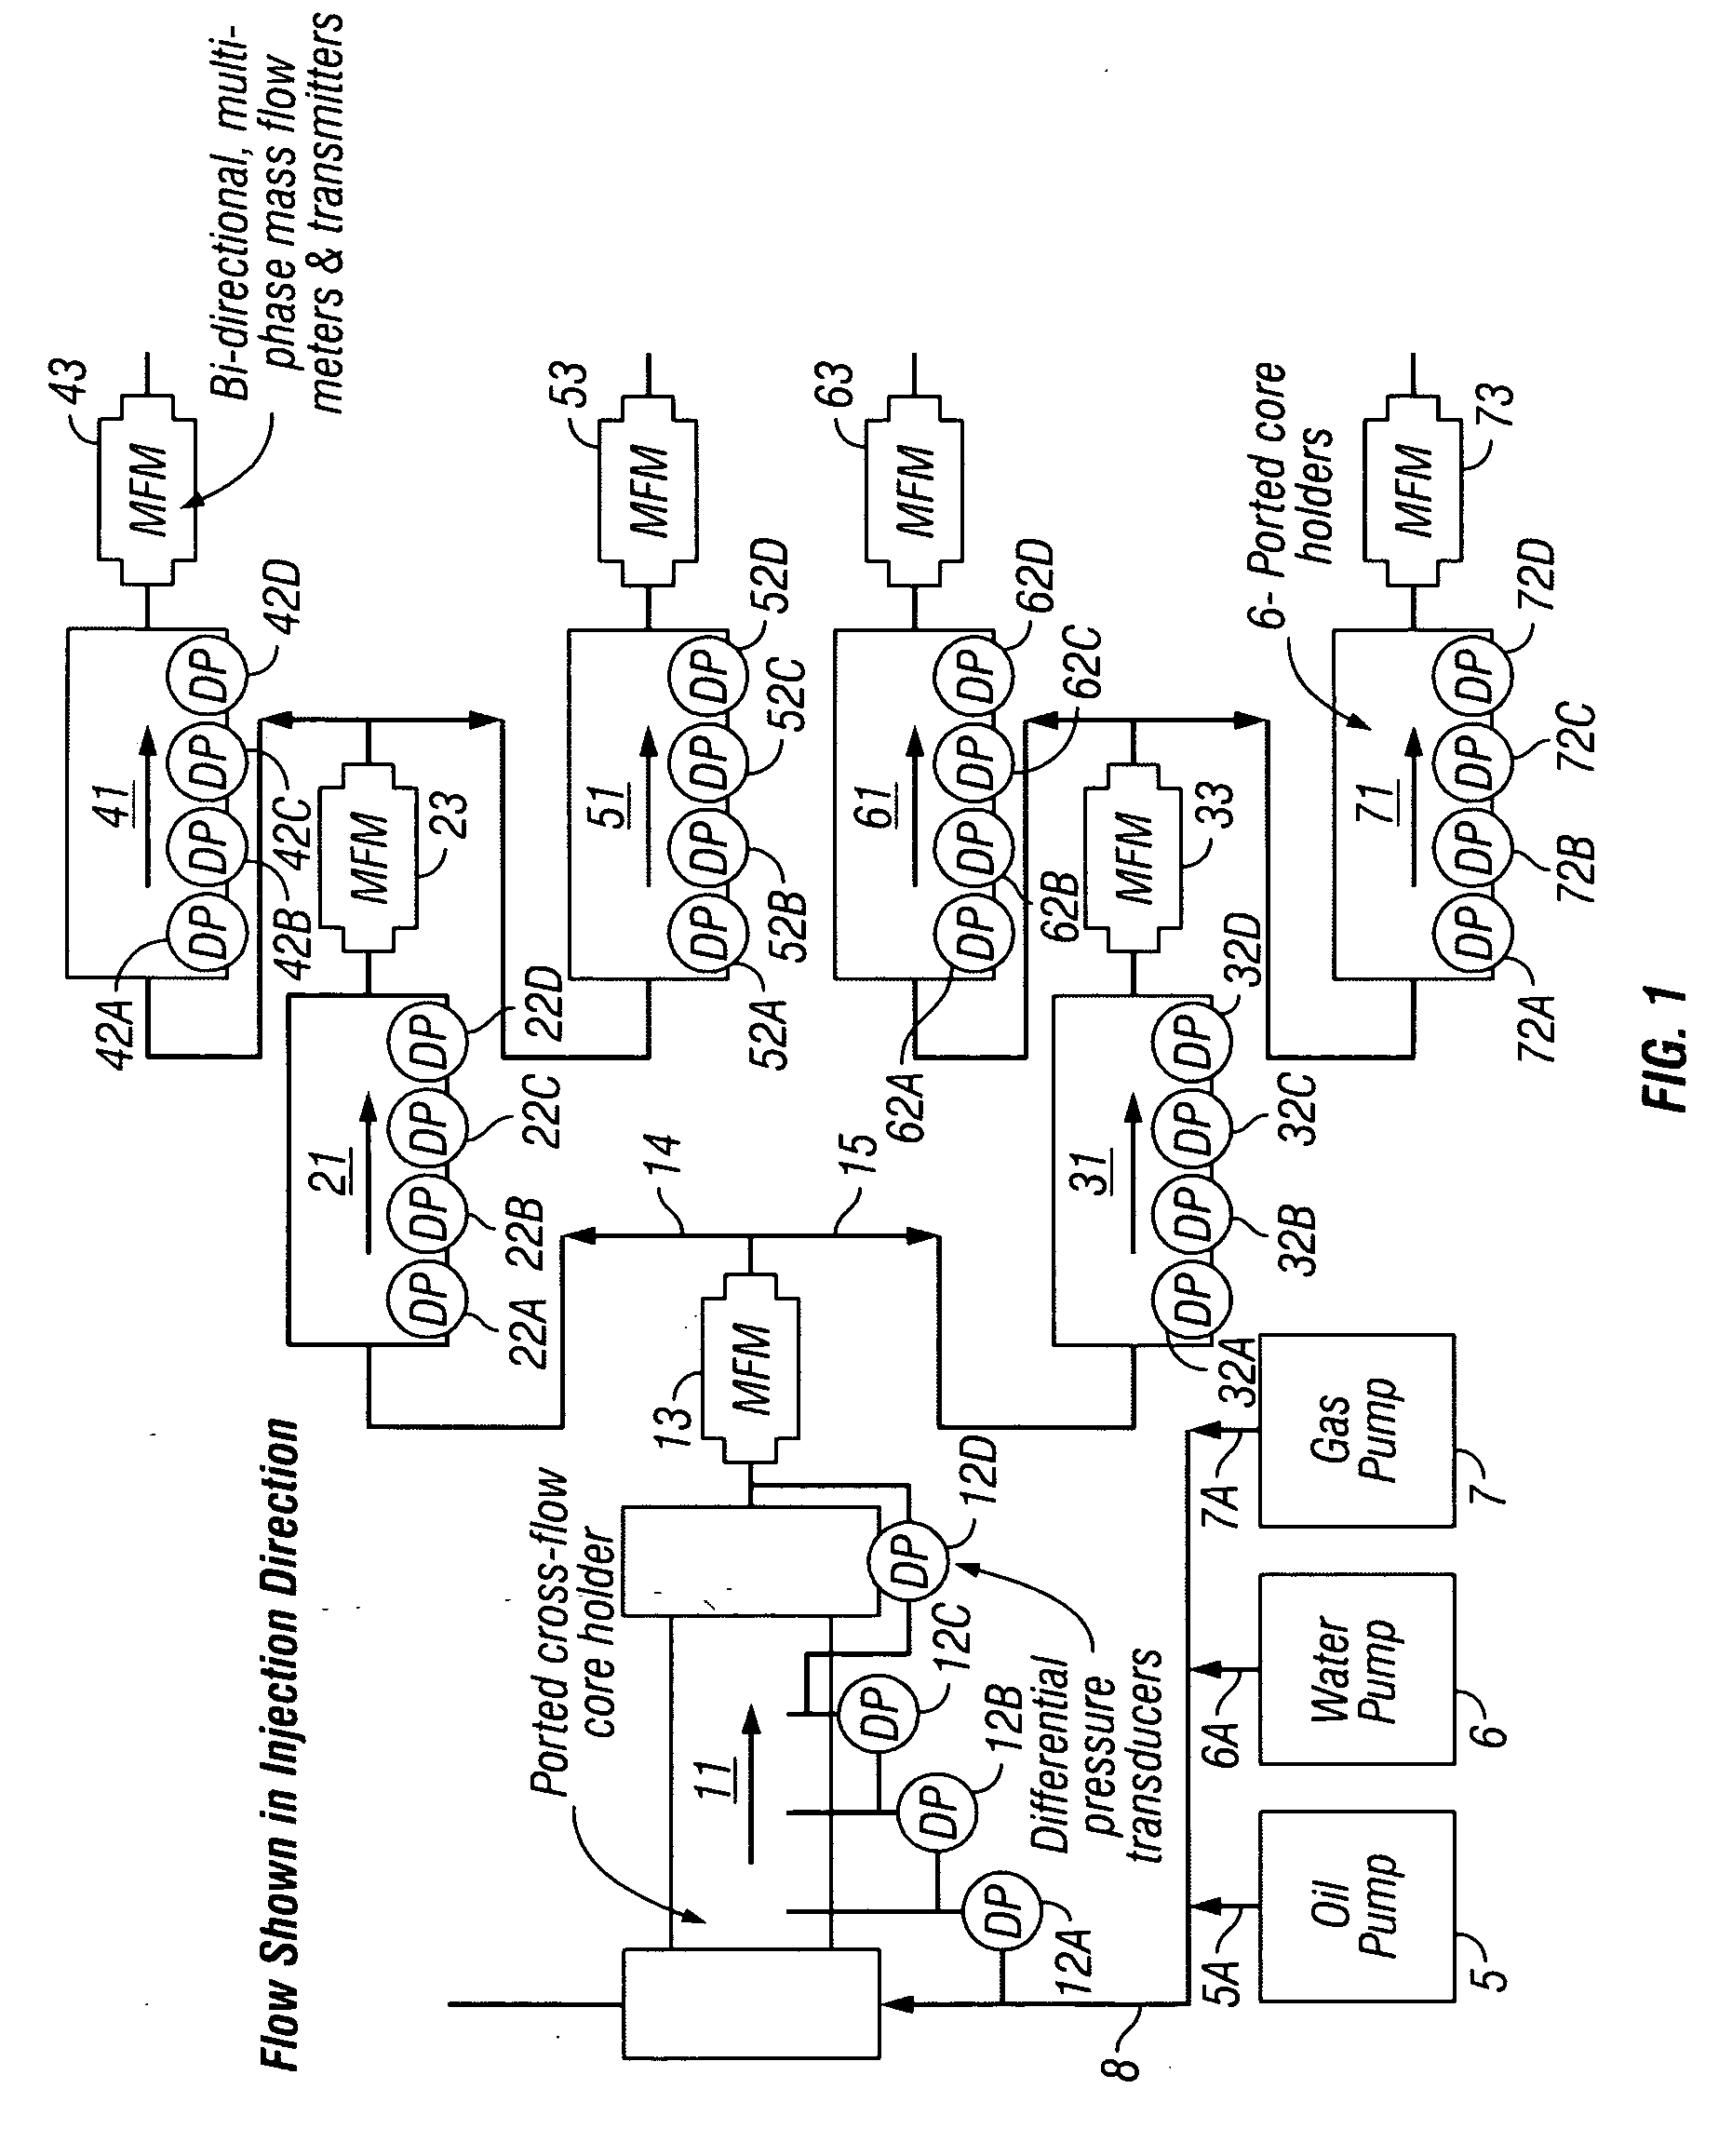 Fluid flow model and method of using the same